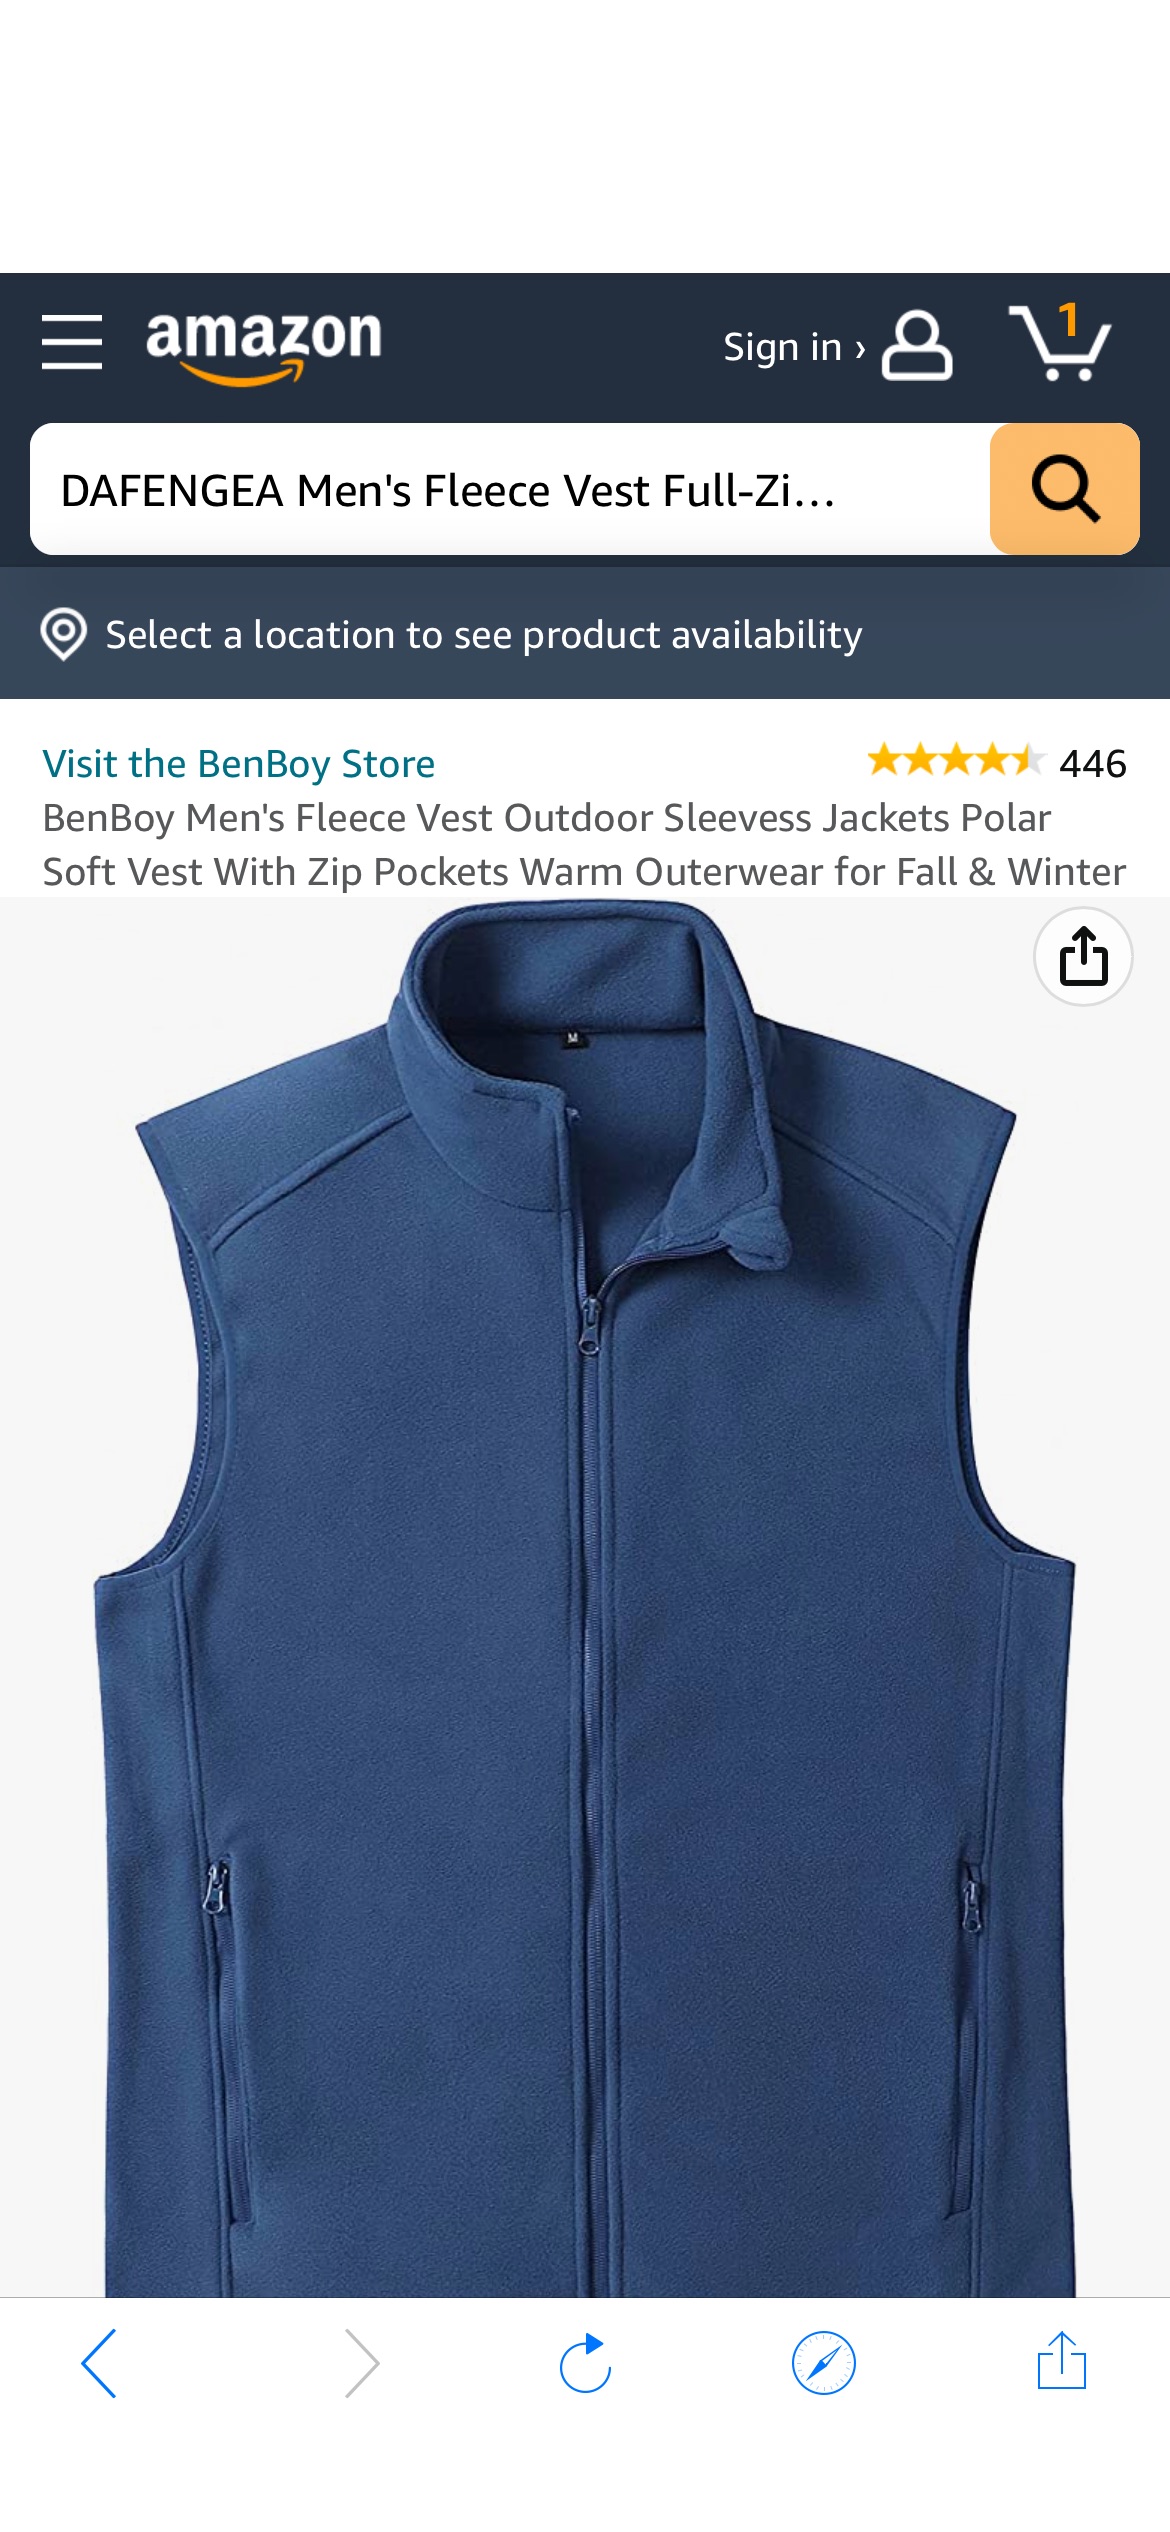 BenBoy Men's Fleece Vest Outdoor Sleevess Jackets Polar Soft Vest With Zip Pockets Warm Outerwear for Fall & Winter,MJ1058M-Denim Blue-S at Amazon Men’s Clothing store